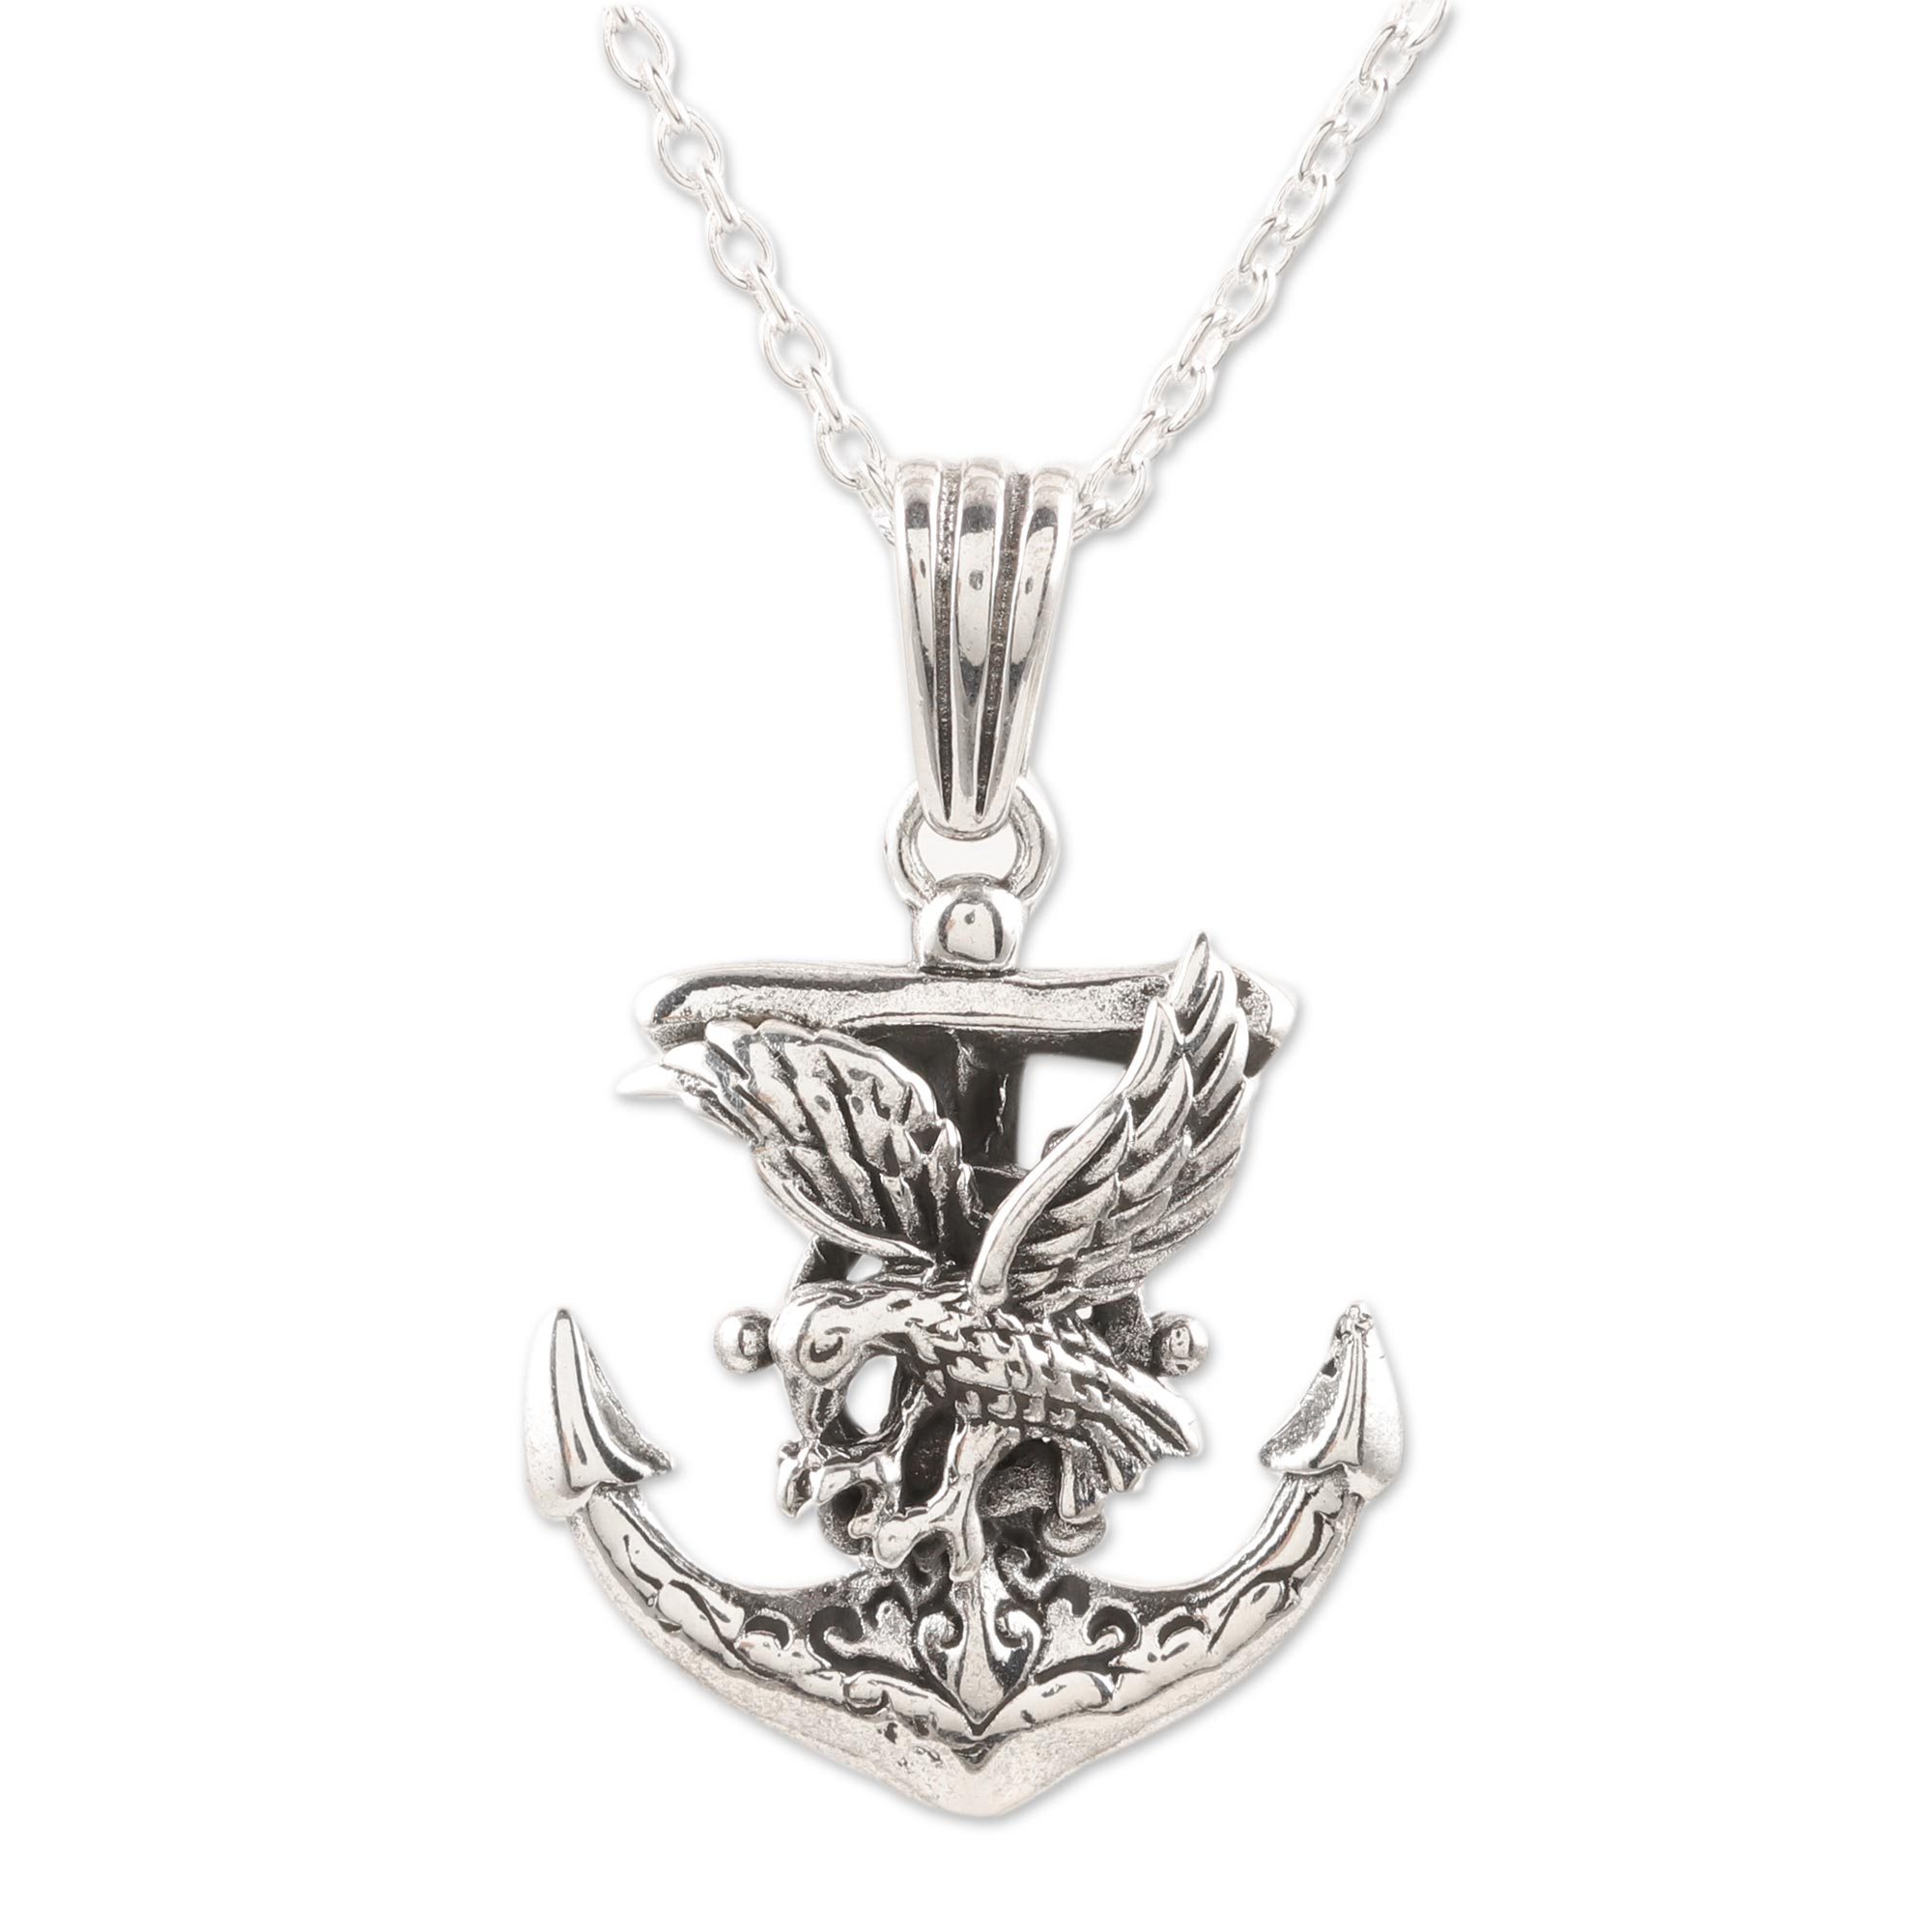 Sterling Silver Eagle and Anchor Pendant Necklace - Swift Eagle | NOVICA